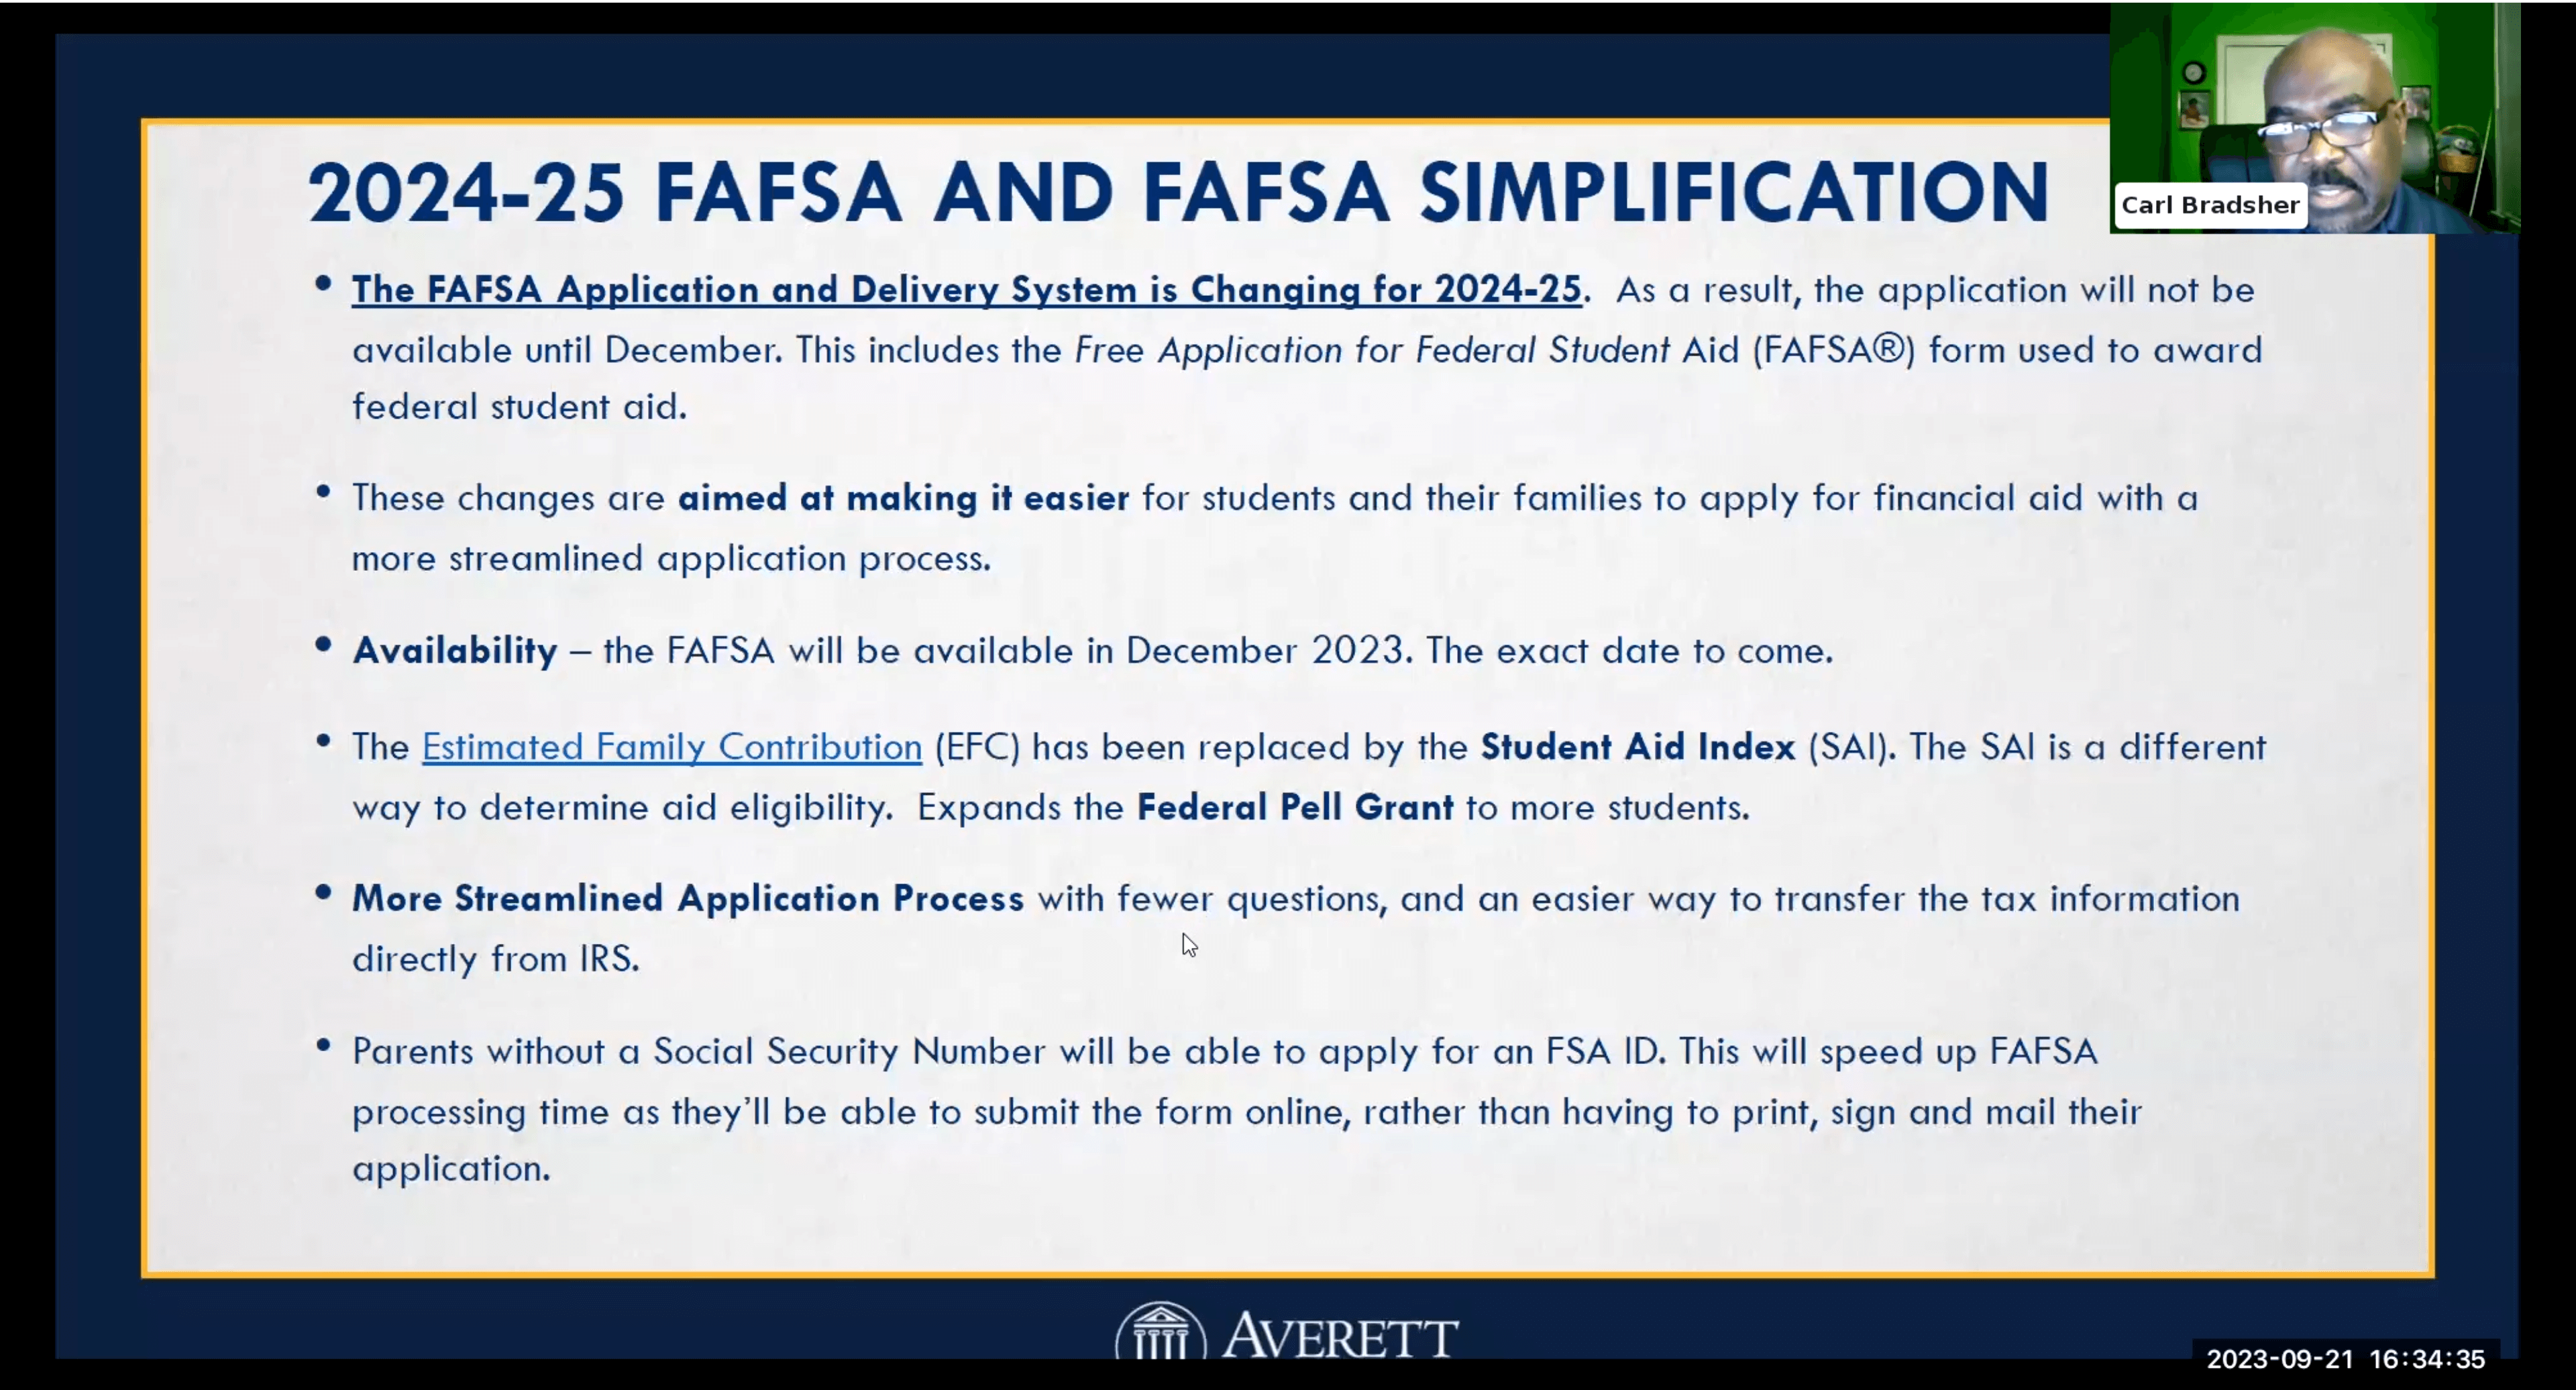 New changes to federal student aid application process, including a delayed FAFSA availability date 